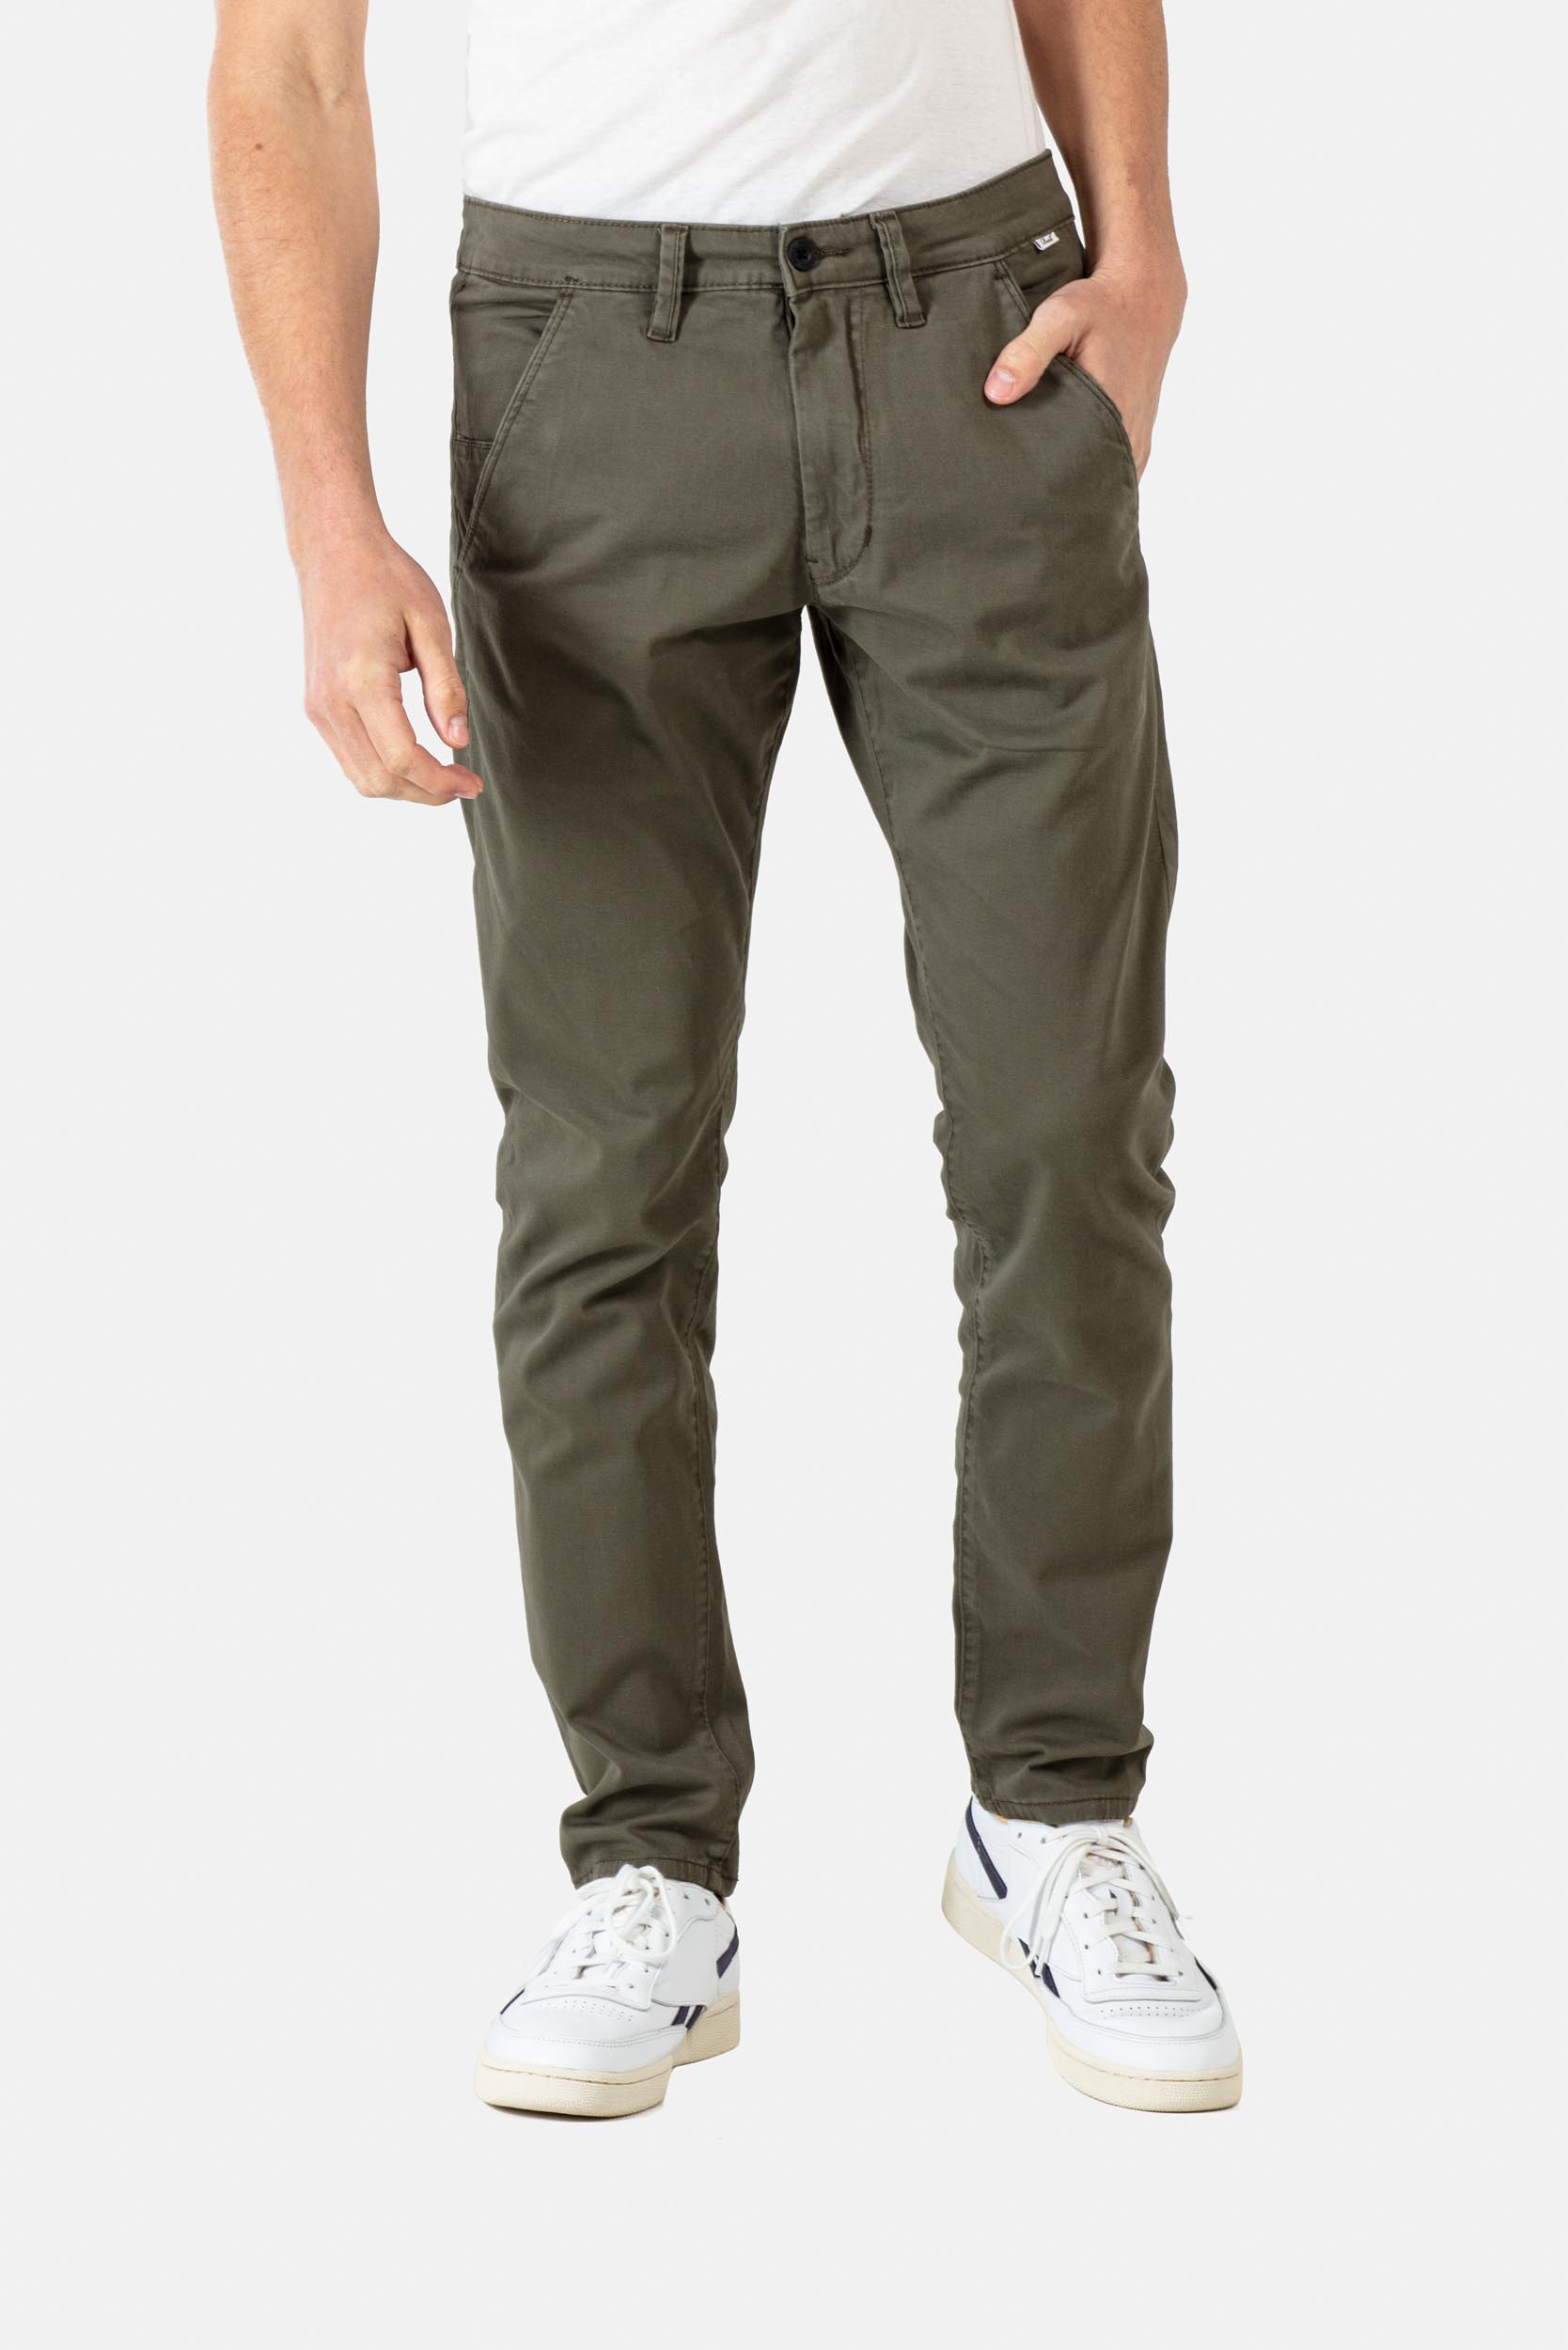 Flex Tapered Chino Olive REELL-SHOP | The Official Reell Online Shop